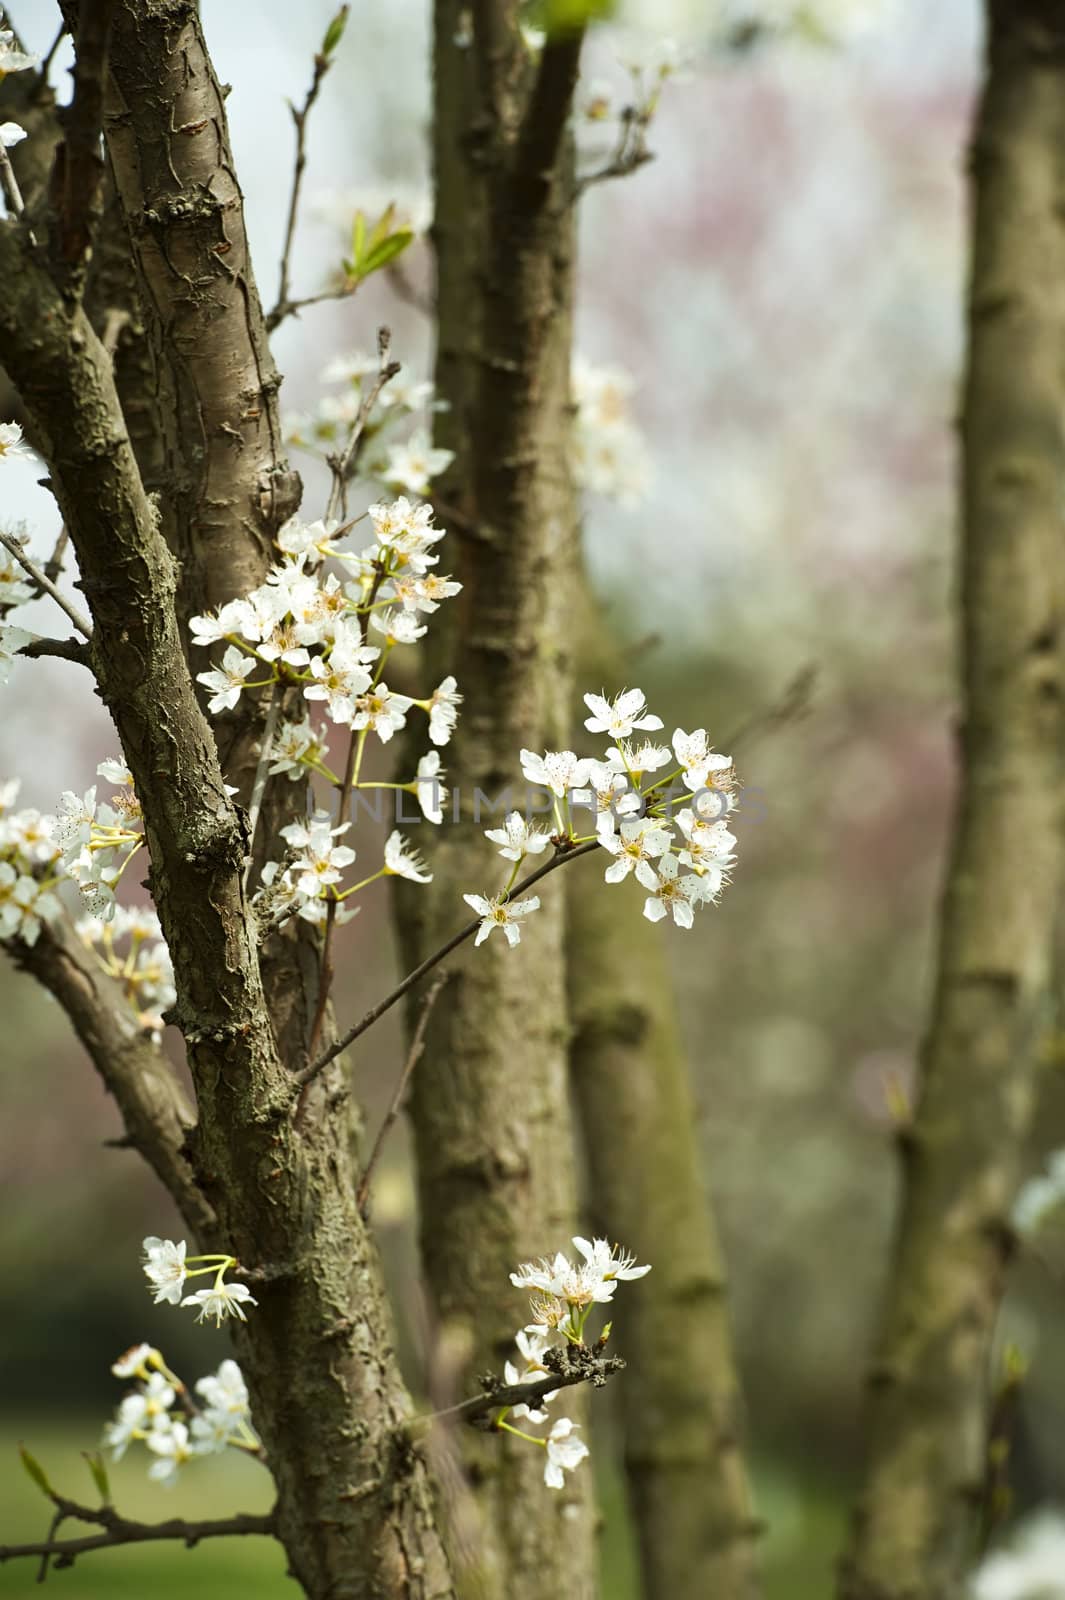 white plum blossom in a garden at spring by jackq